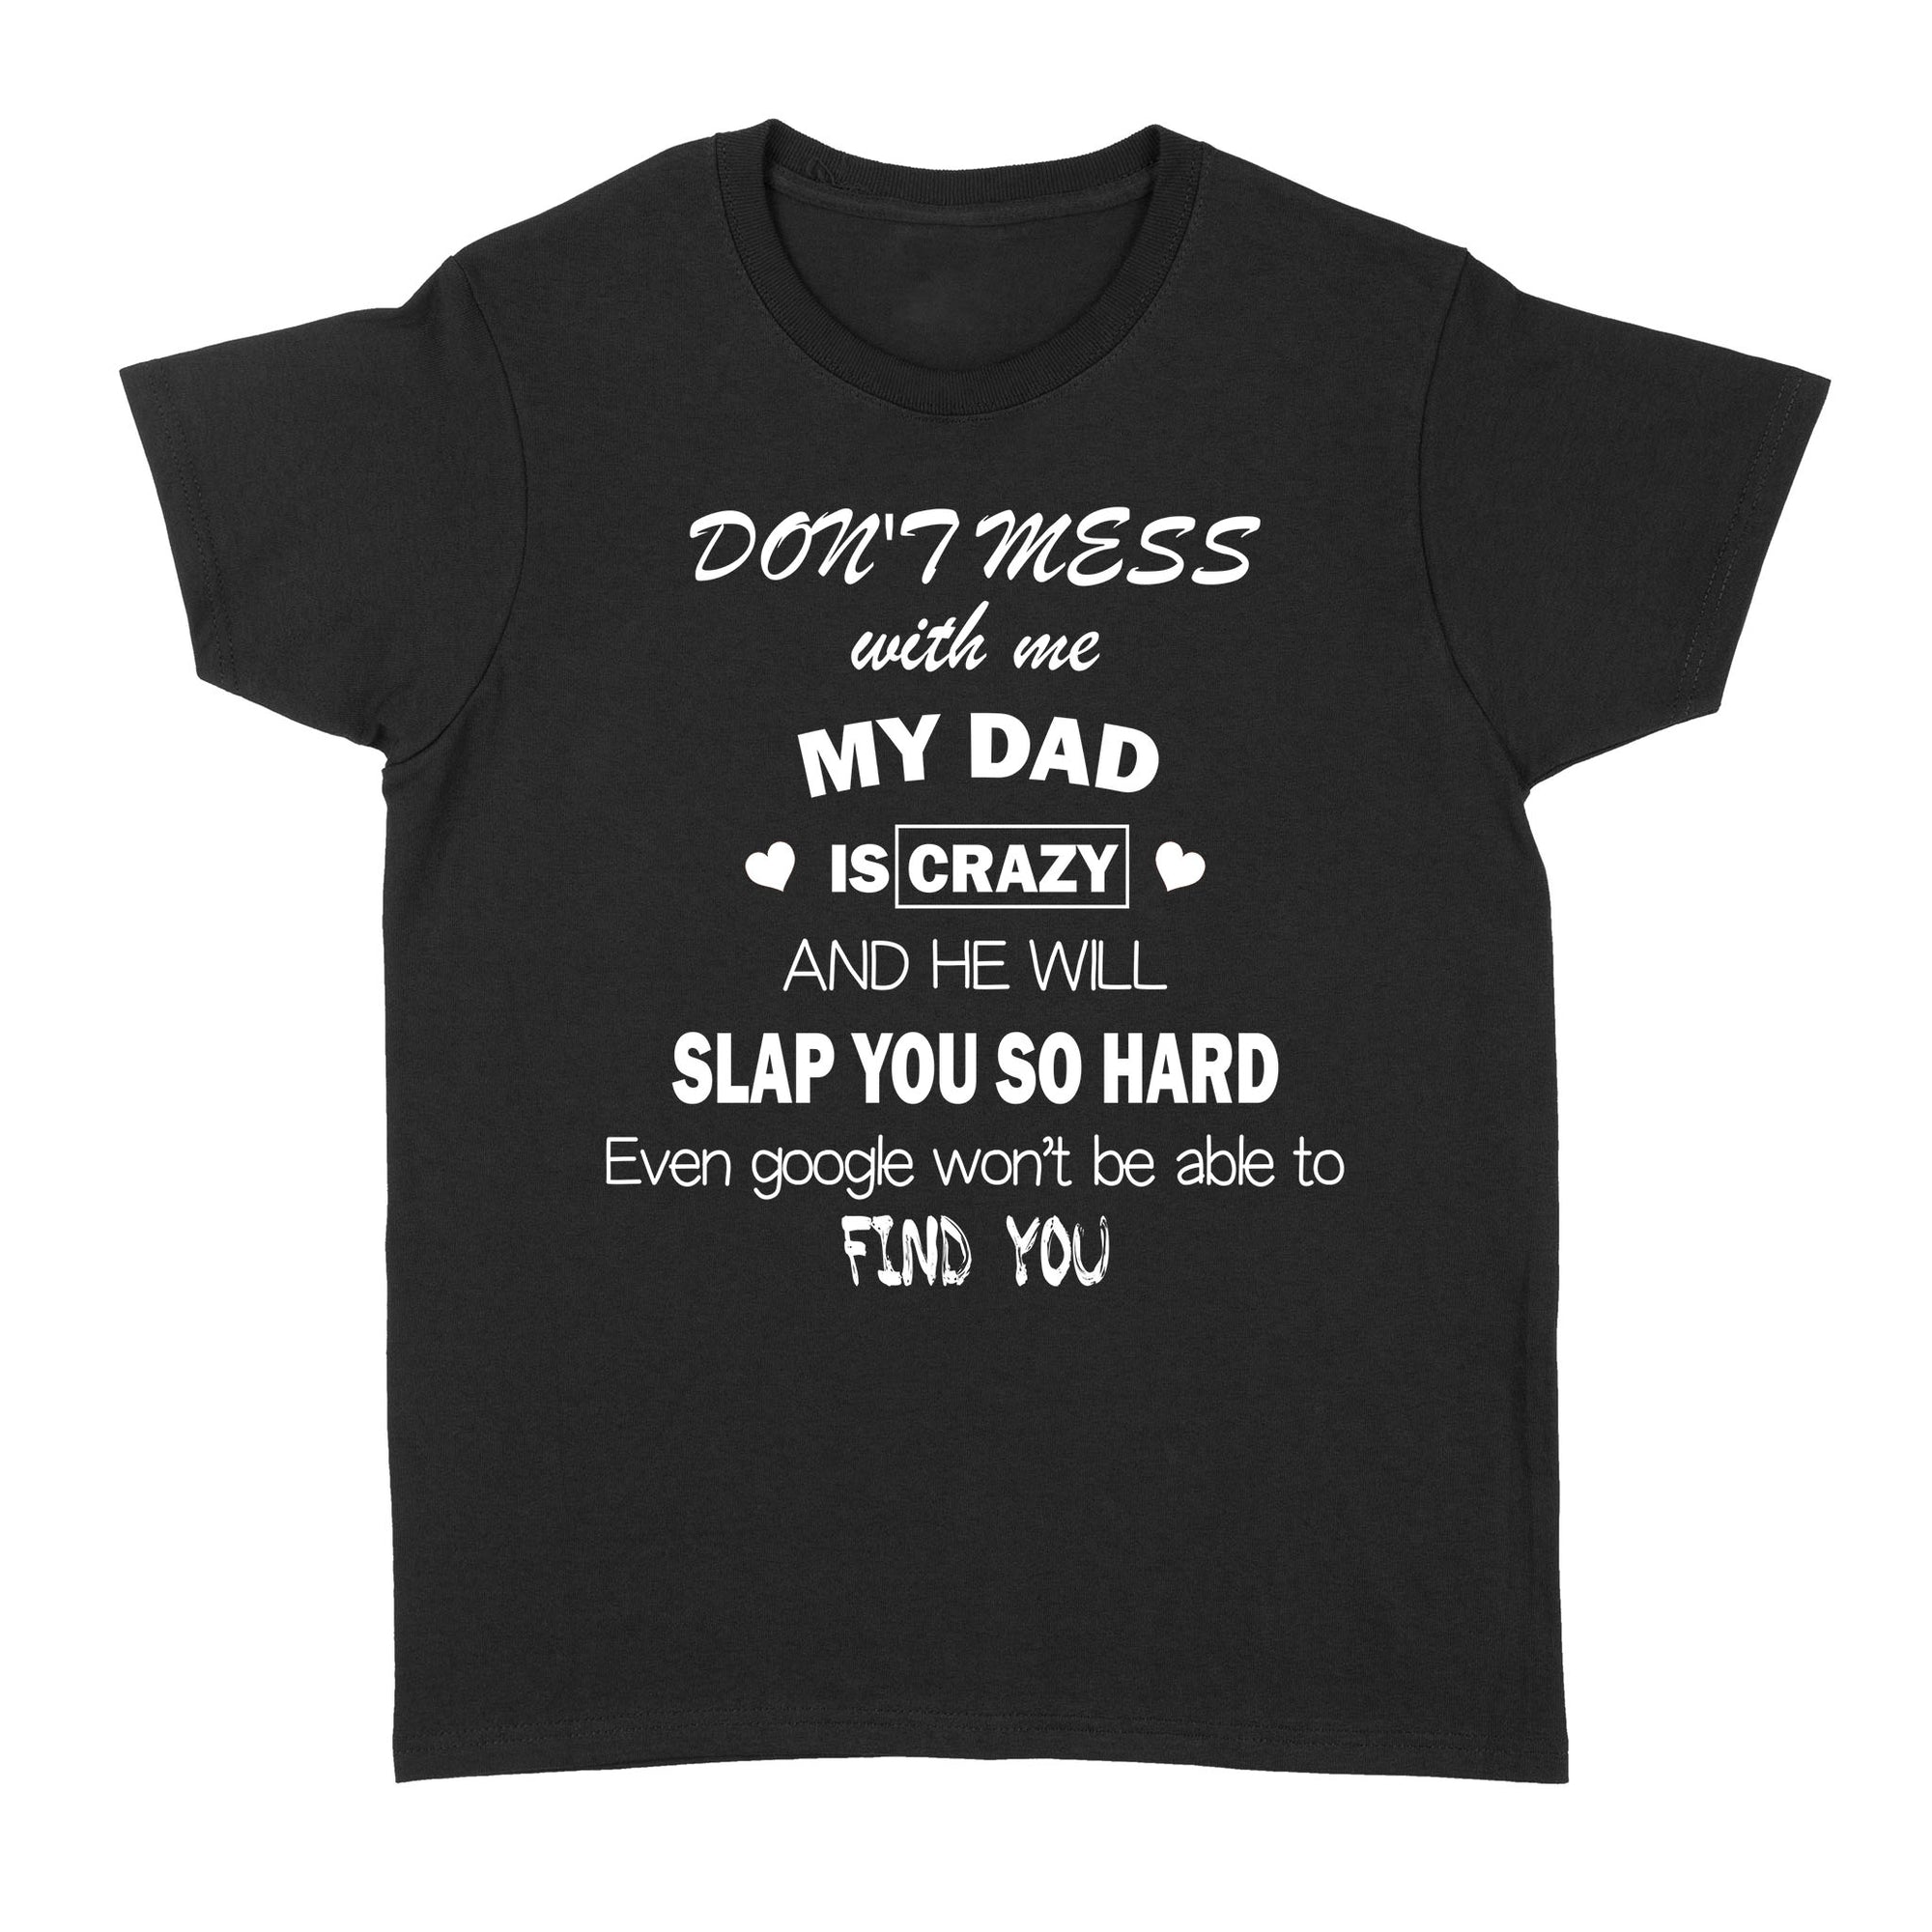 Don't Mess With Me My Dad Is Crazy And He Will Slap You So Hard TL - Standard Women's T-shirt